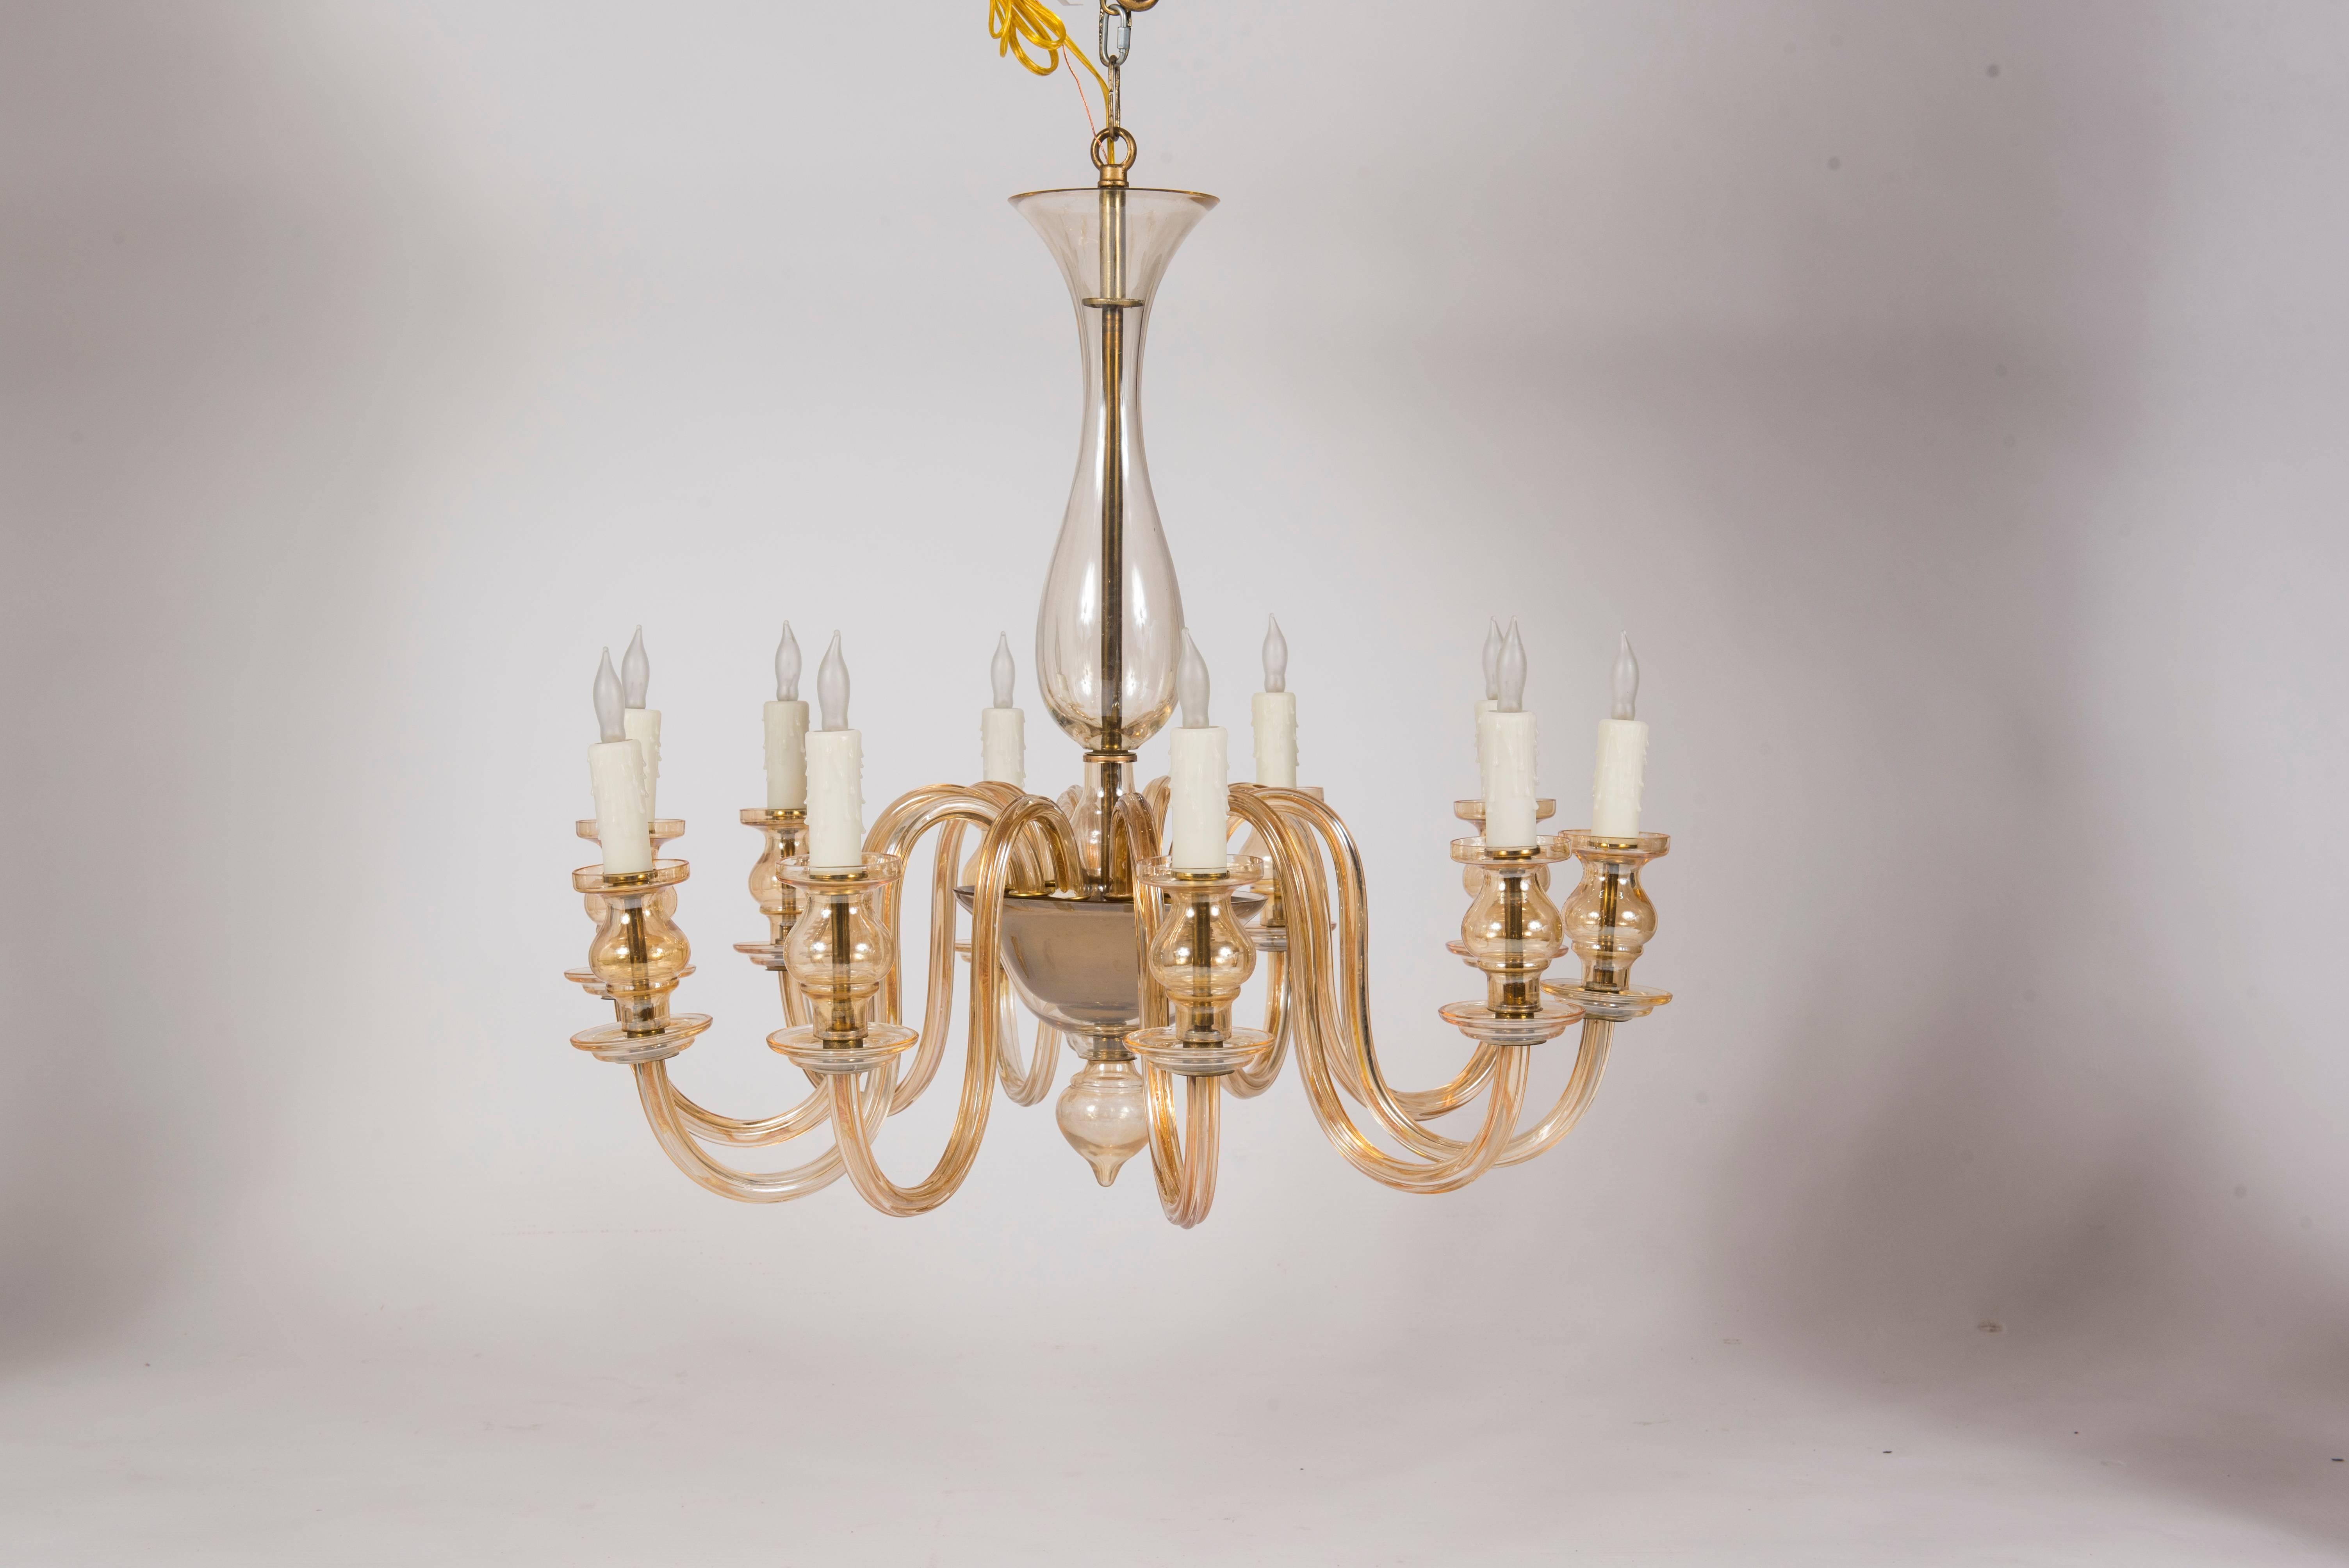 A ten-light Murano glass chandelier. This chandelier is pale amber in coloring with brass detailing. This chandelier is newly electrified and can be easily disassembled for shipping.